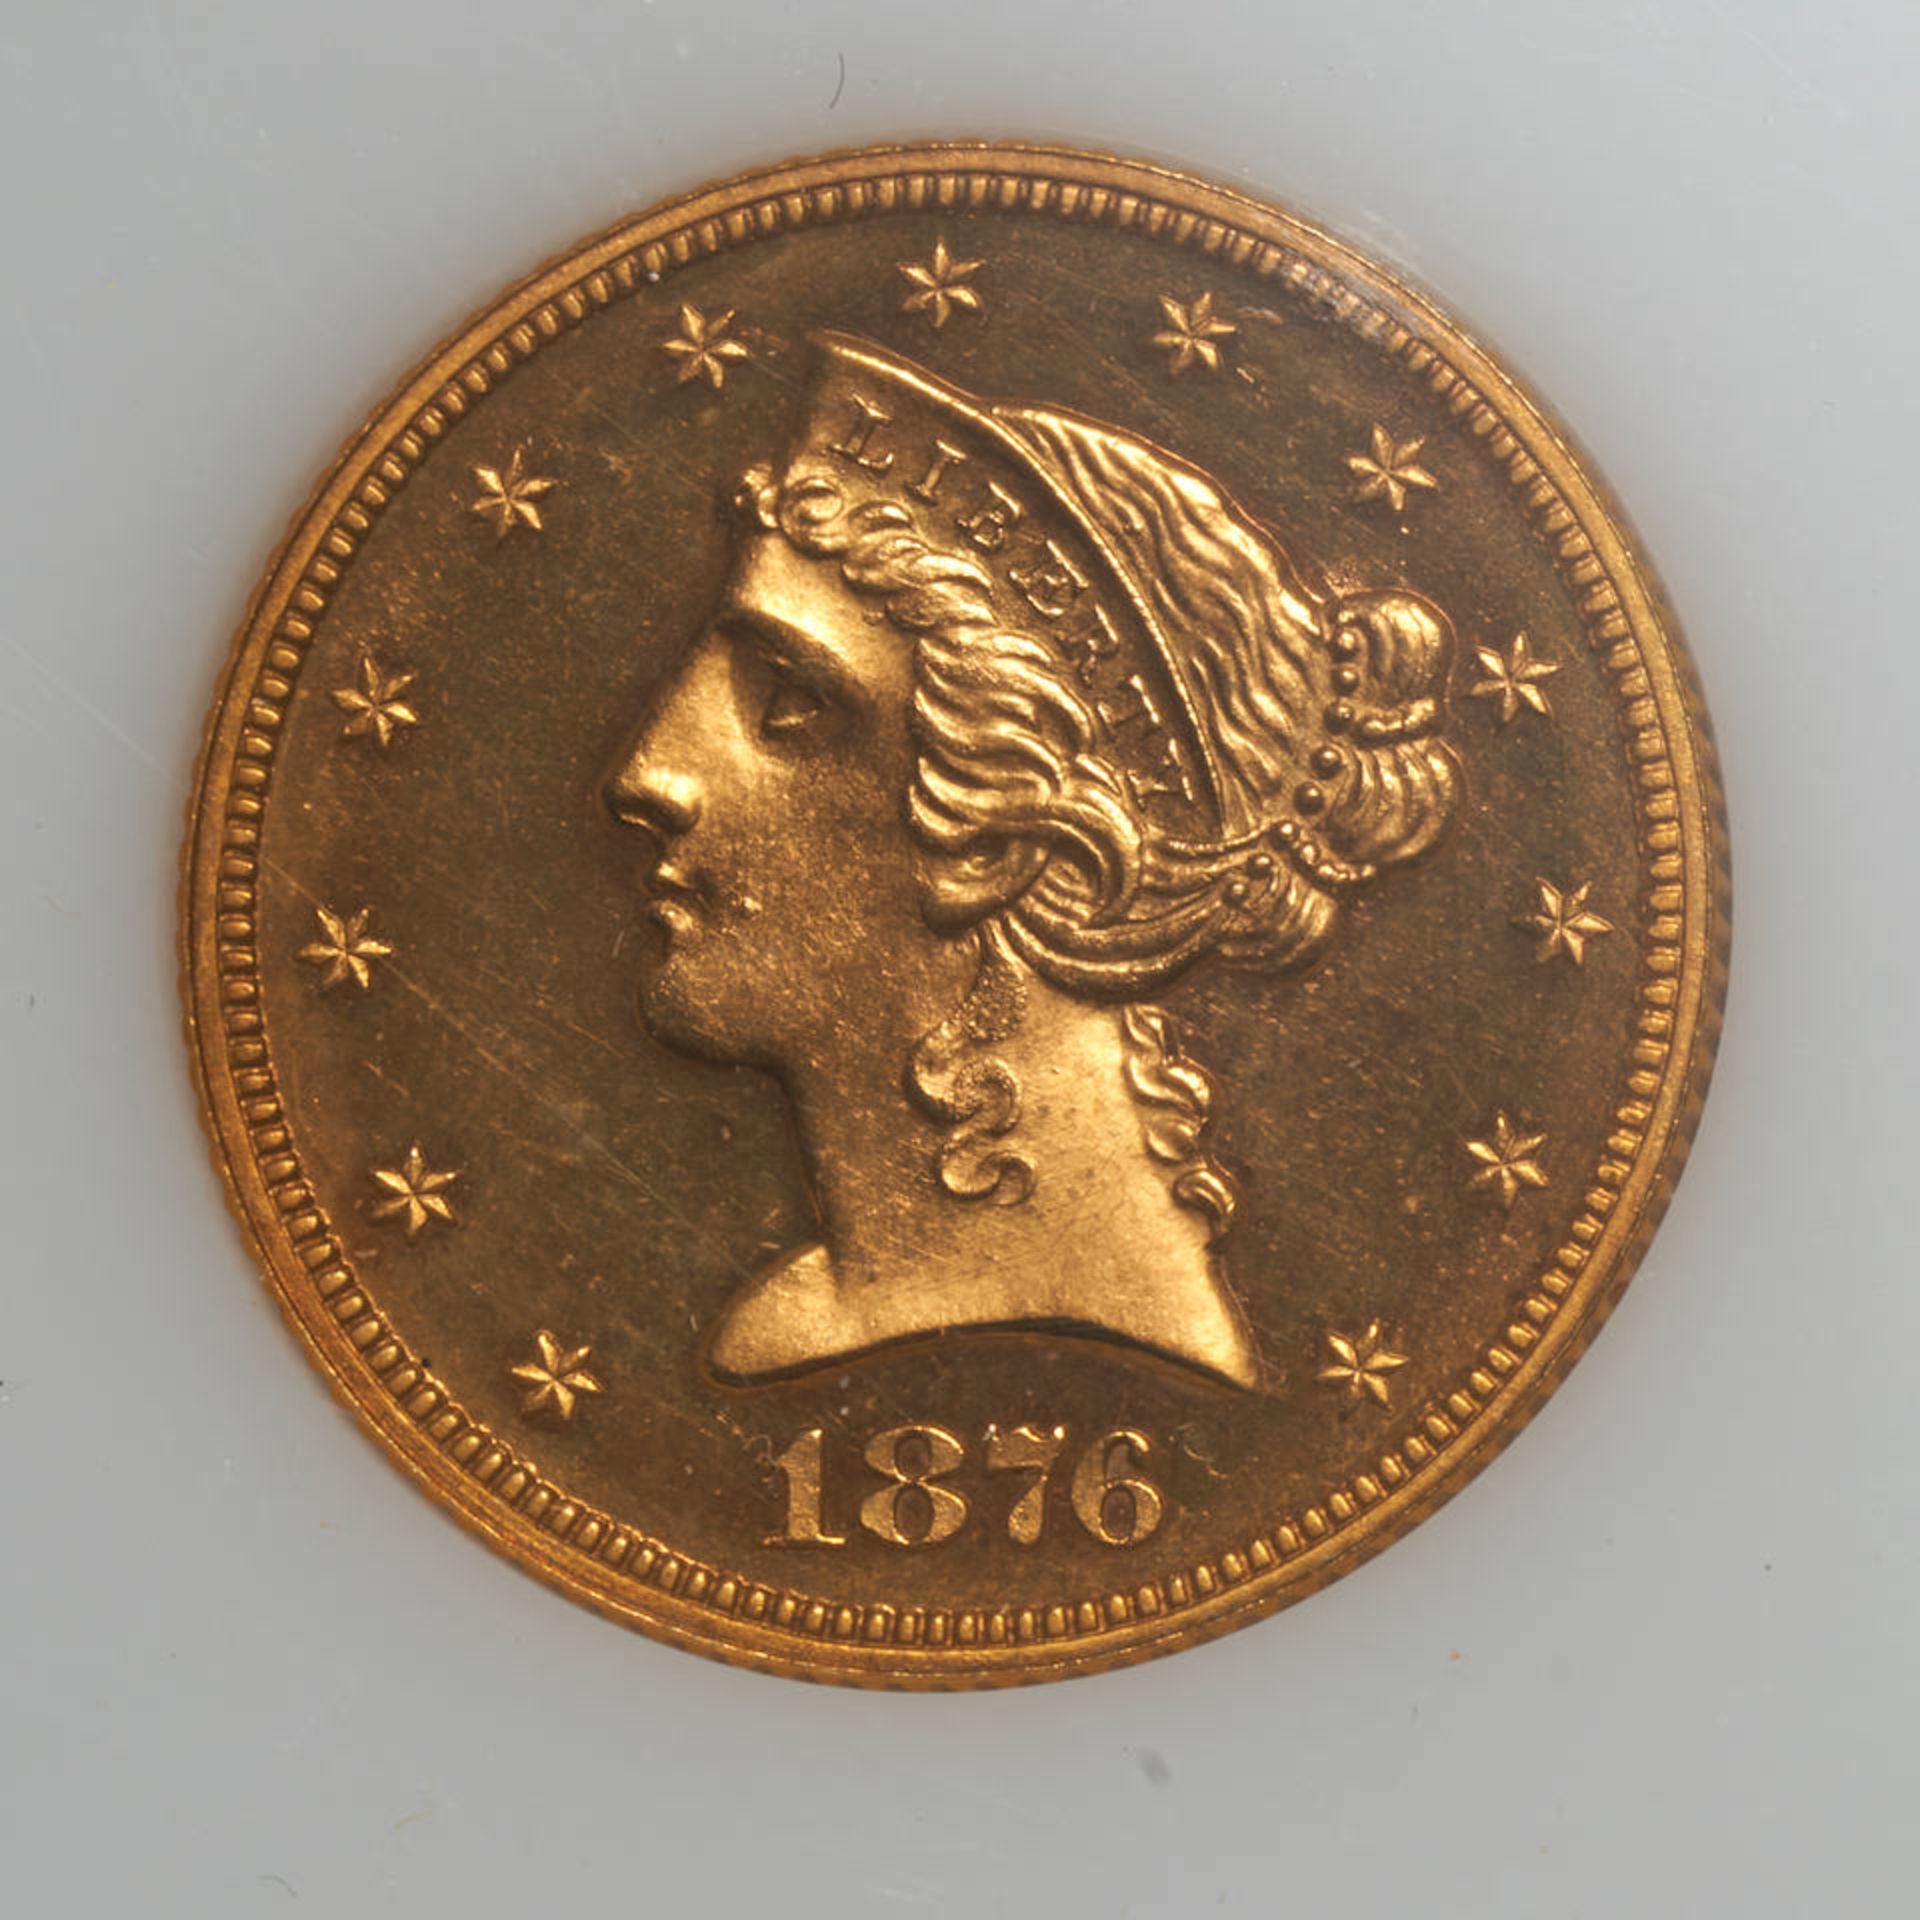 United States Proof 1876 Liberty $5 Half Eagle Gold Coin. - Image 3 of 4